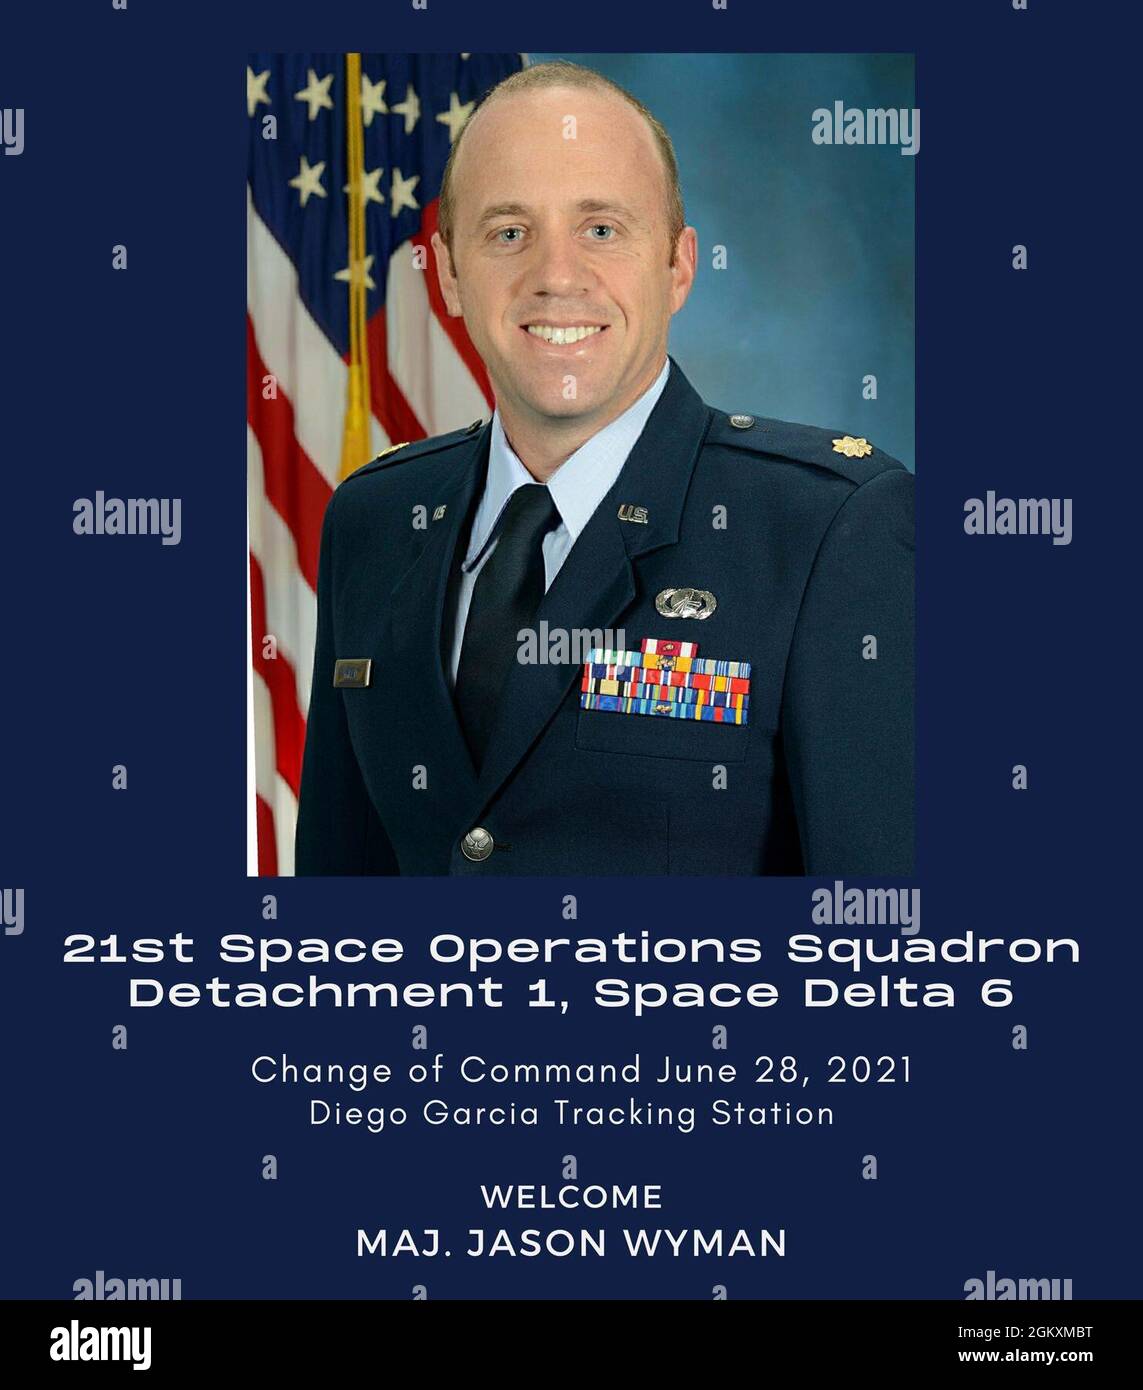 DIEGO GARCIA TRACKING STATION, British Indian Ocean Territory – U.S. Air Force Maj. Jason Wyman, Space Delta 6 – Cyberspace Operations, 21st Space Operations Squadron, Detachment 1 commander, takes command on June 28, 2021. Det. 1 is the only remote tracking station located in the southern hemisphere and provides strategic satellite command and control capability for the Space Control Network and Global Positioning System. Stock Photo